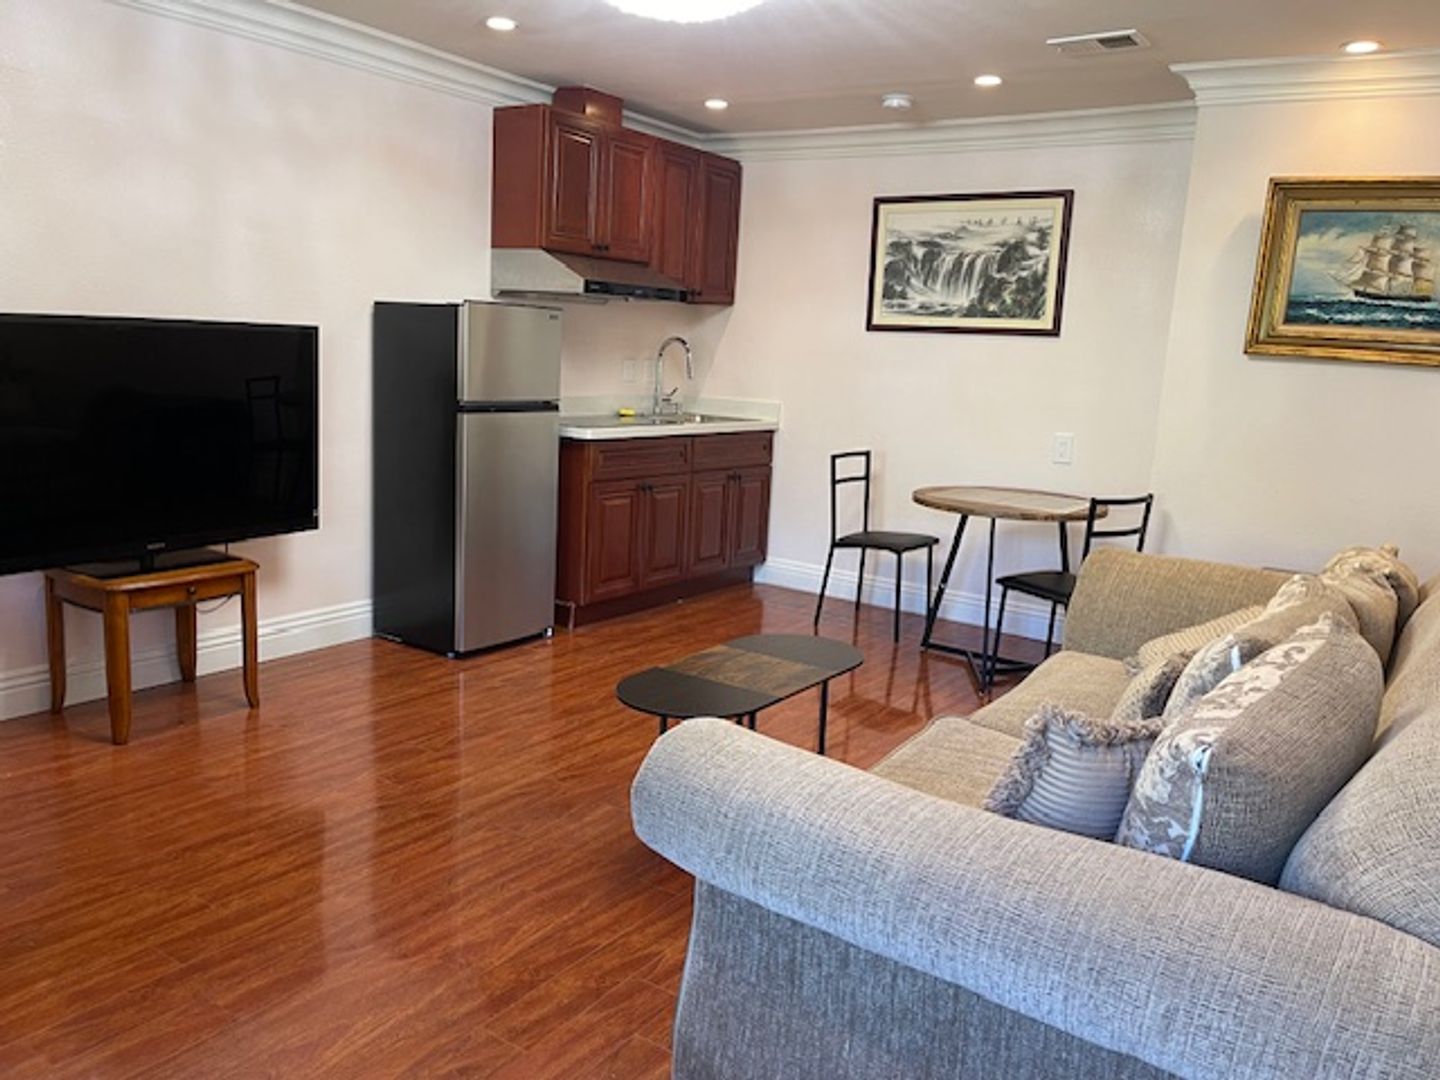 Fully furnished One bedroom unit for rent in Fremont Parkmont area